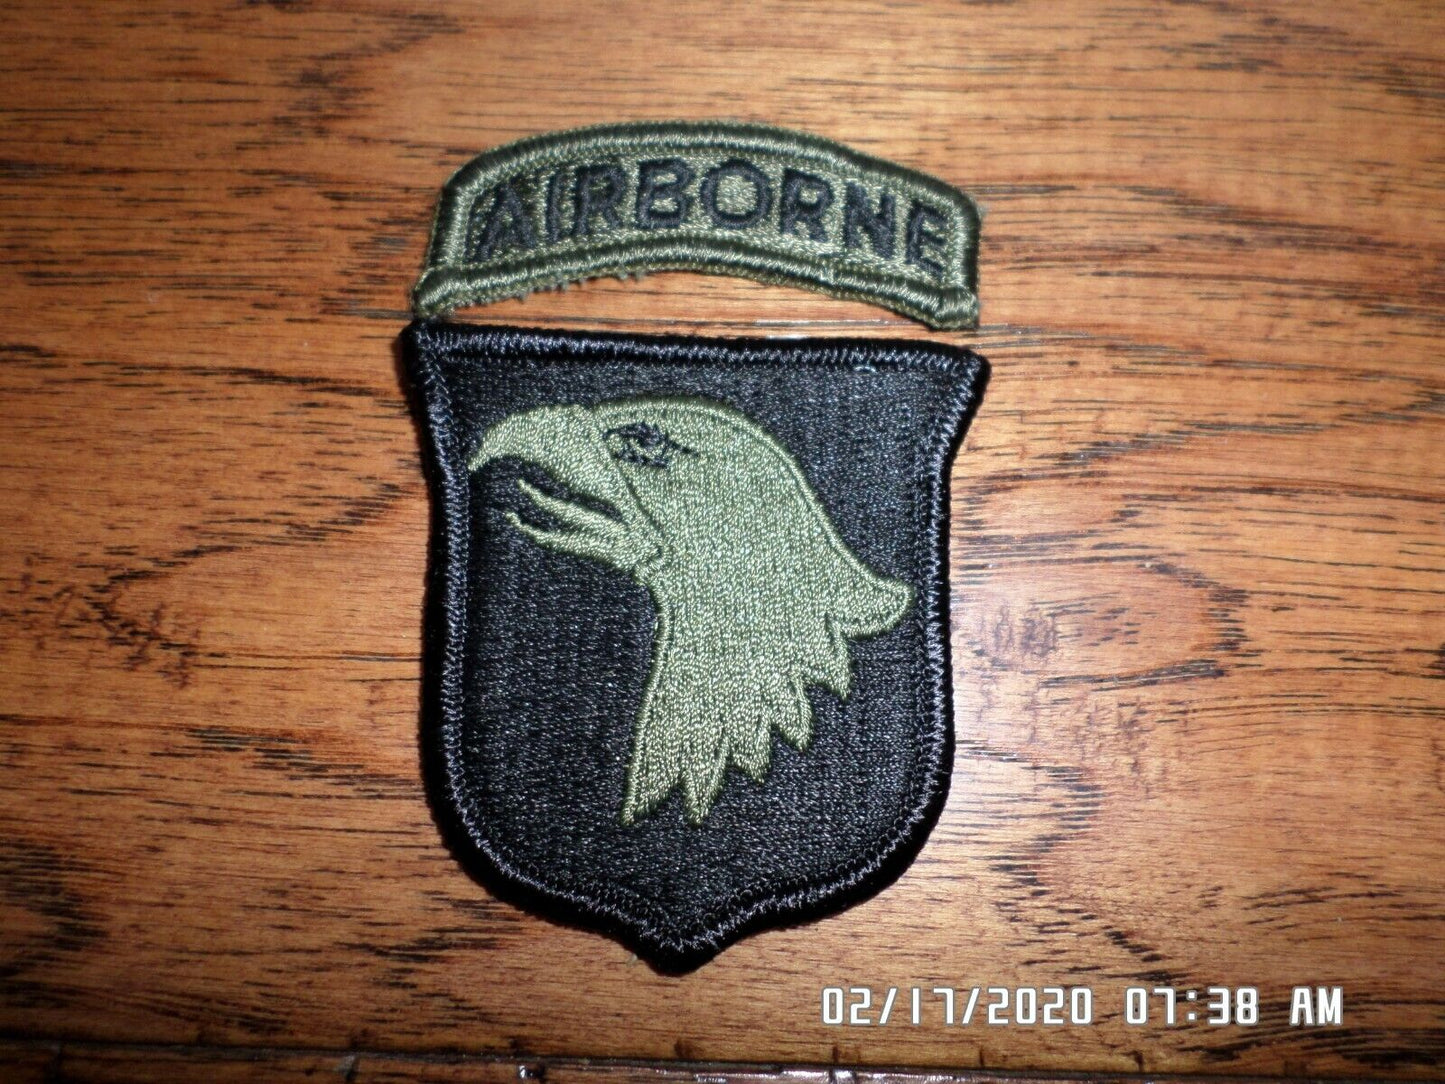 U.S ARMY 101ST AIRBORNE PATCH SHOULDER SLEEVE GENUINE MILITARY REGULATION ISSUE